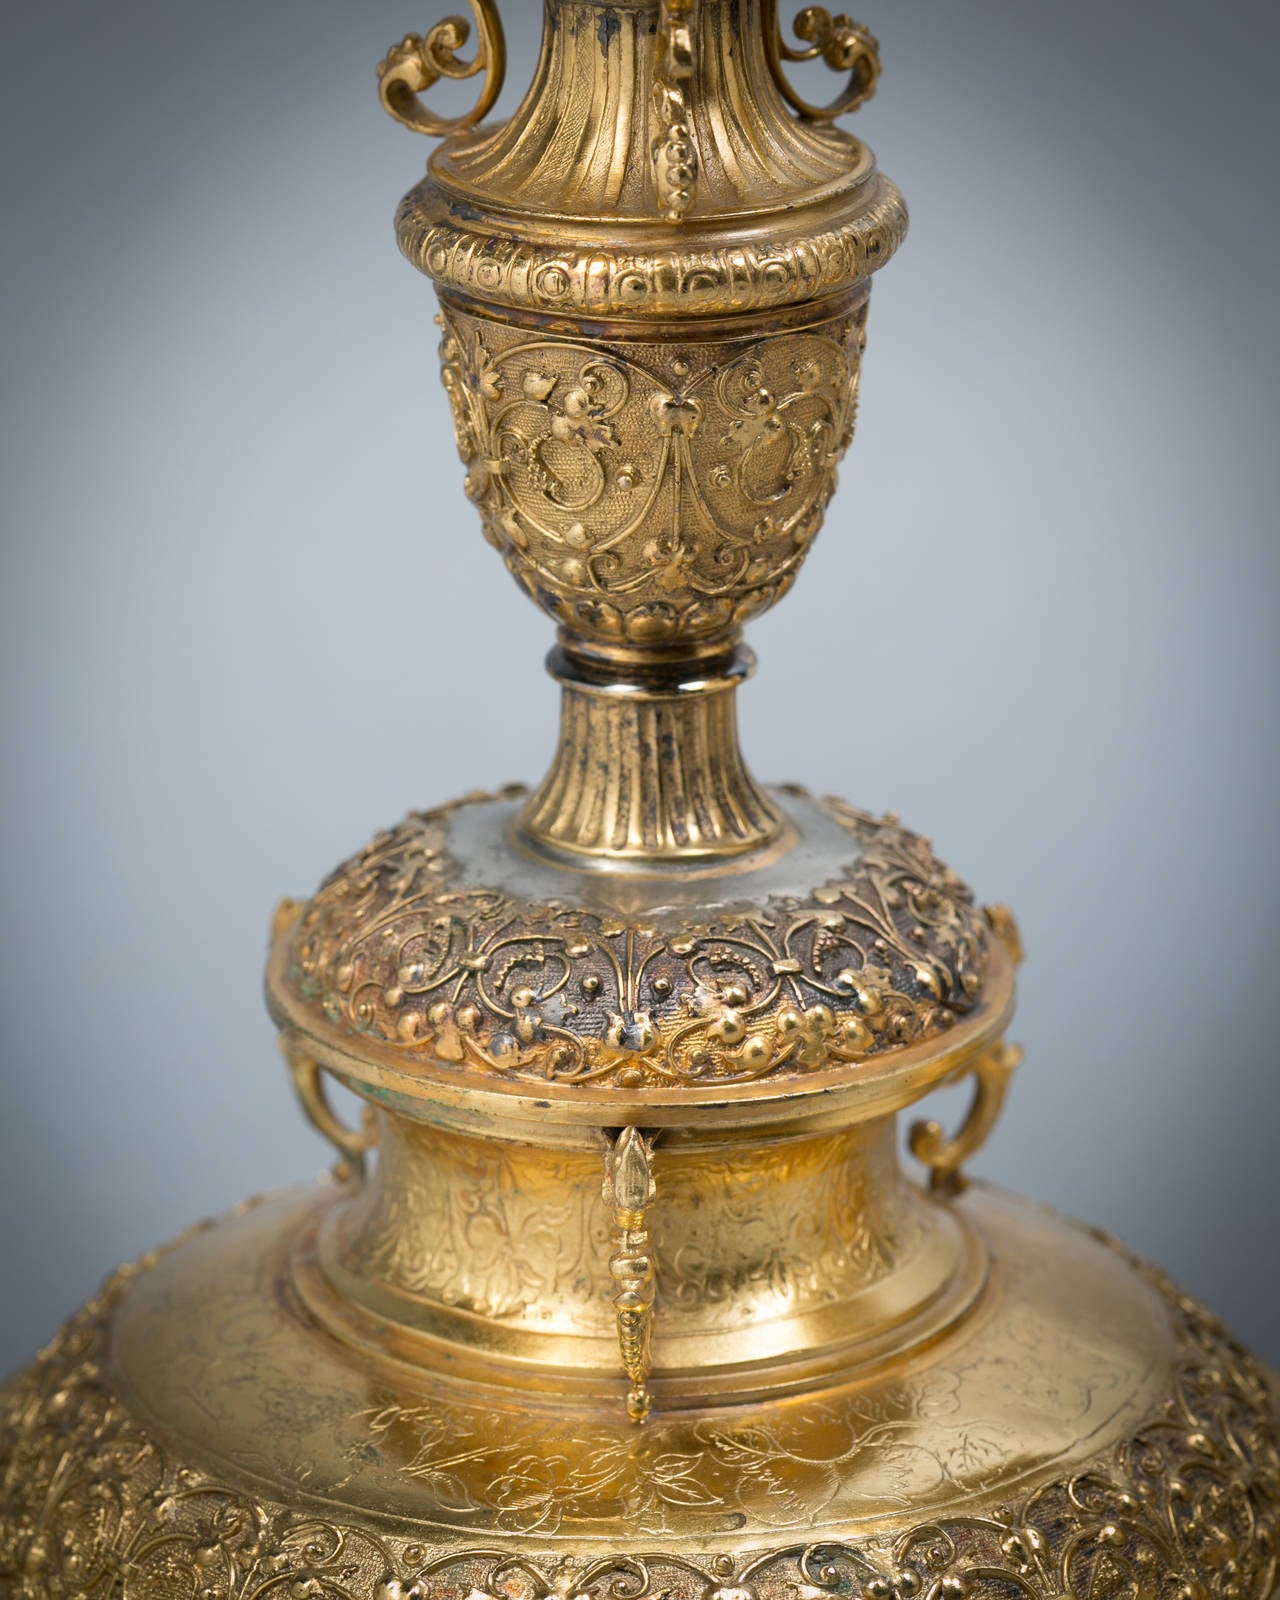 While apparently unmarked, this pair of standing cups are almost certainly by Elkington and Co. and are replicas of a silver gilt example in the Victoria and Albert Museum, hallmarked for 1611 with a makers mark of TYL. 
This standing cup at the V&A